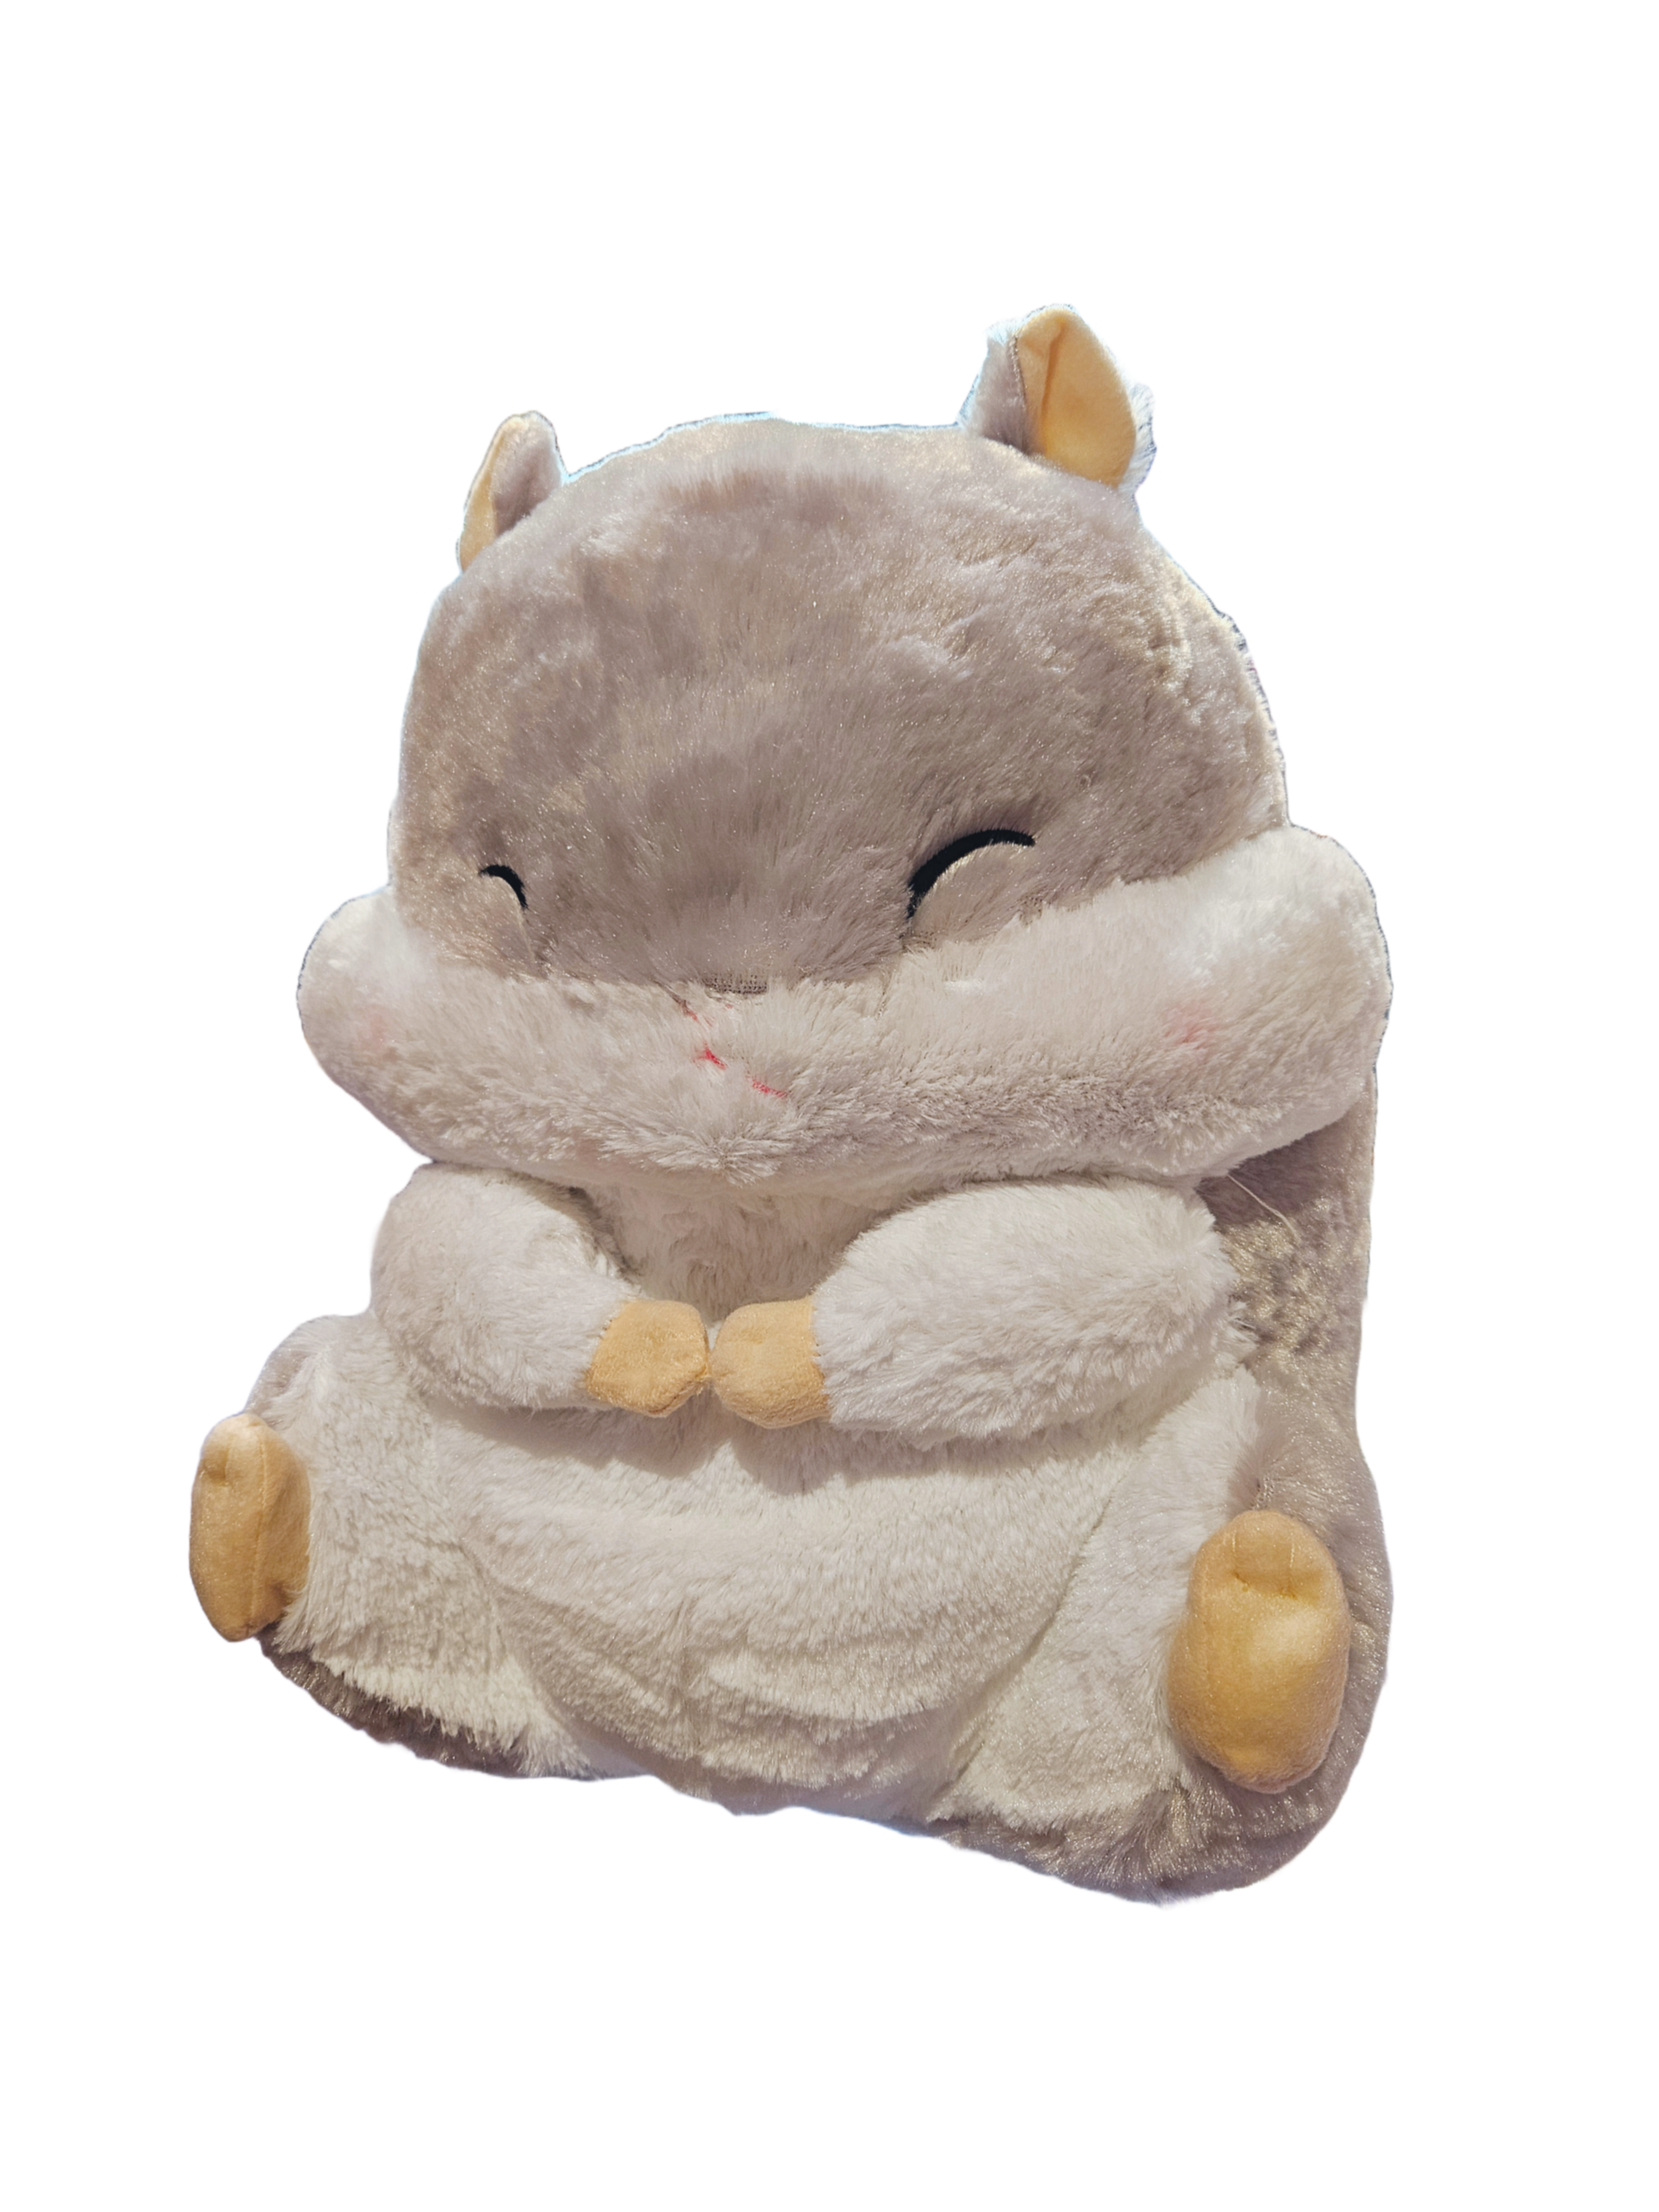 Gray and White Hamster 20 in Amuse Collection Plush